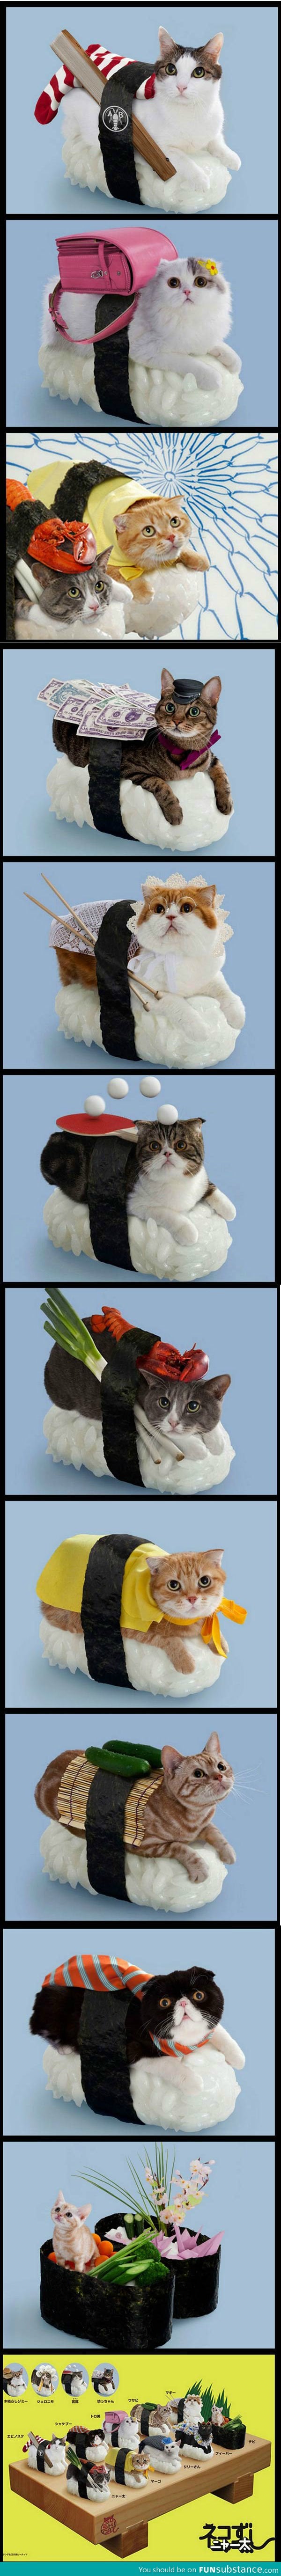 Sushi cat photos, only in Japan I guess?